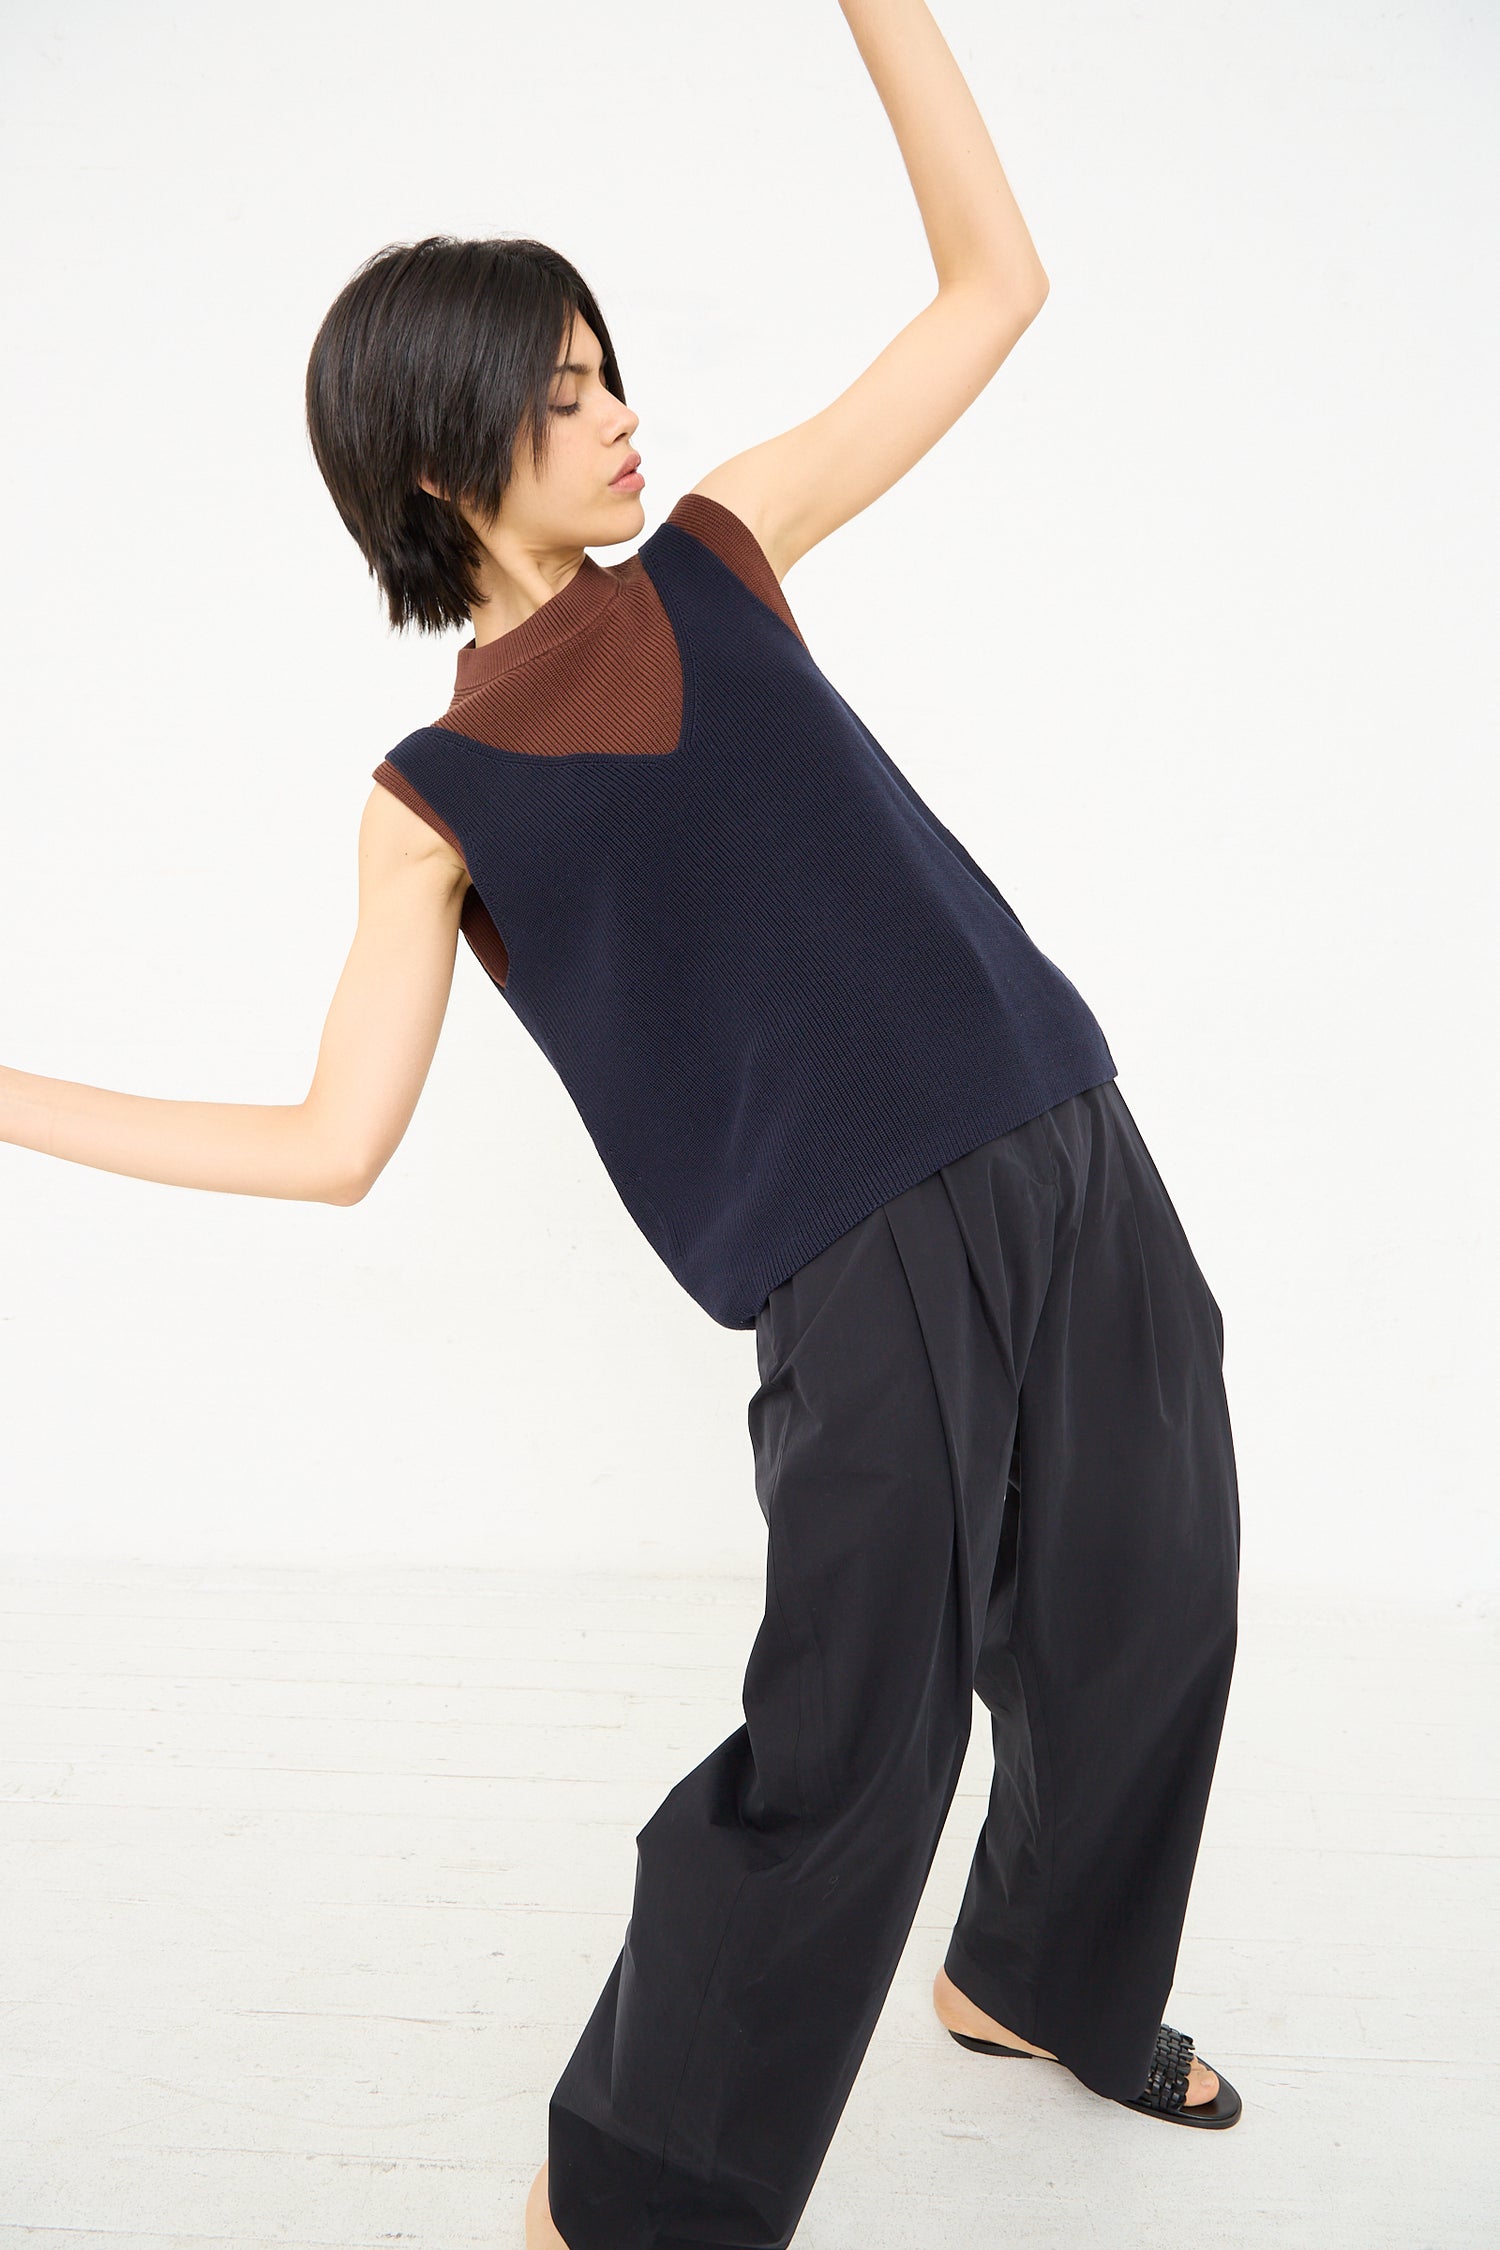 A person with short hair, wearing a Bara Knit Rib Top in Darkest Navy and wide-legged pants from Studio Nicholson, is captured mid-pose against a white background.